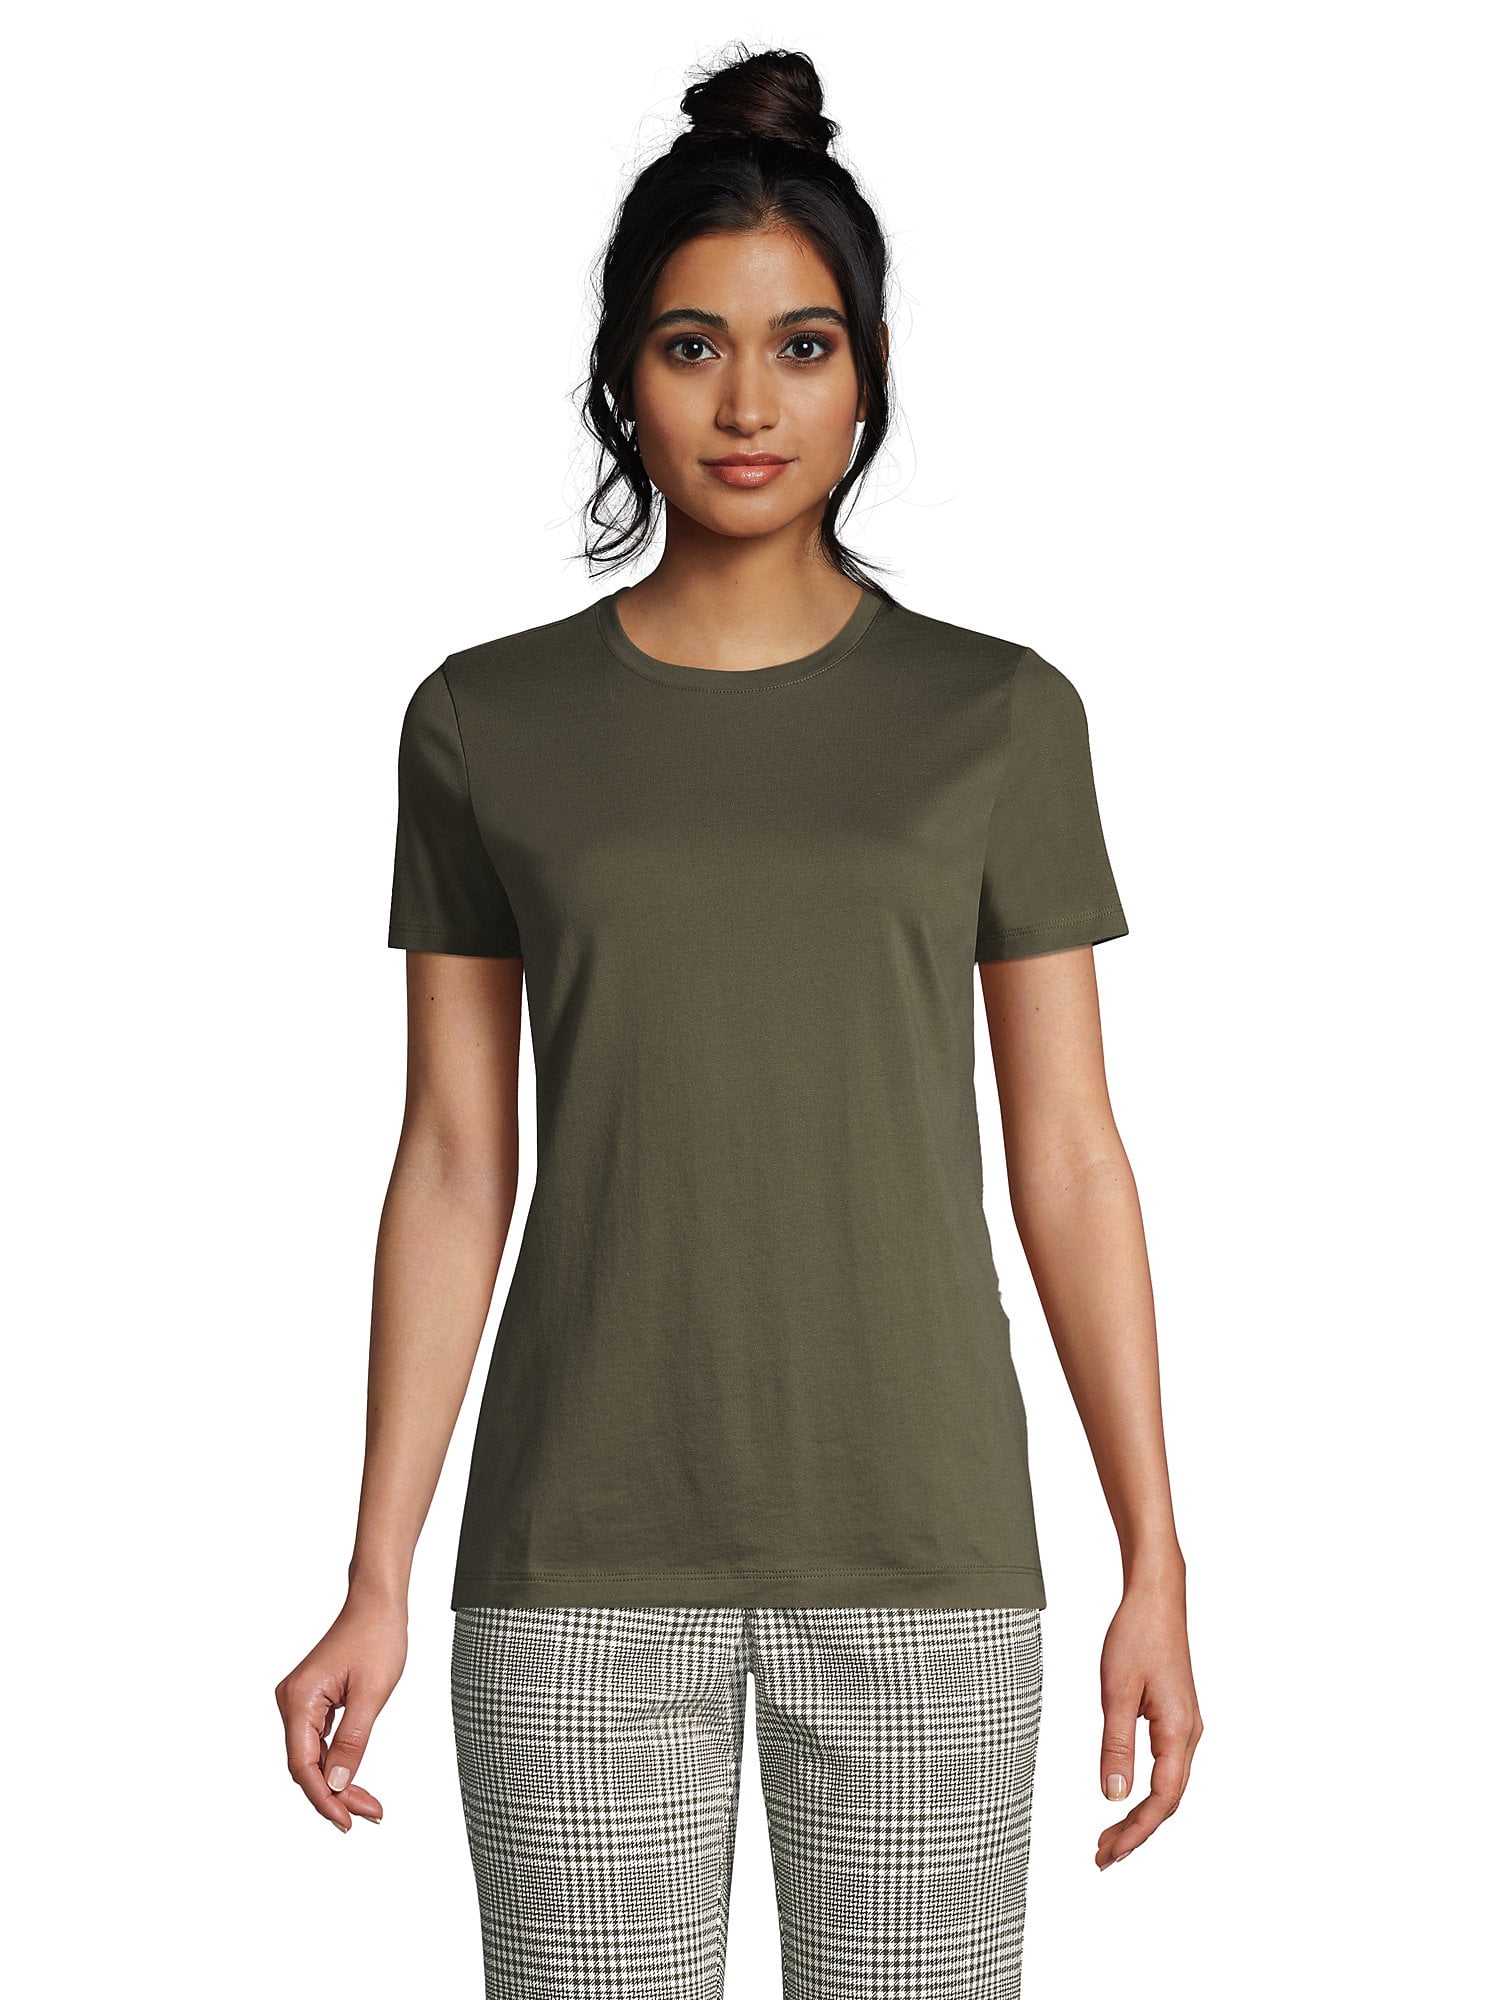 Lands' End Women's Relaxed Supima Cotton Short Sleeve Crewneck T